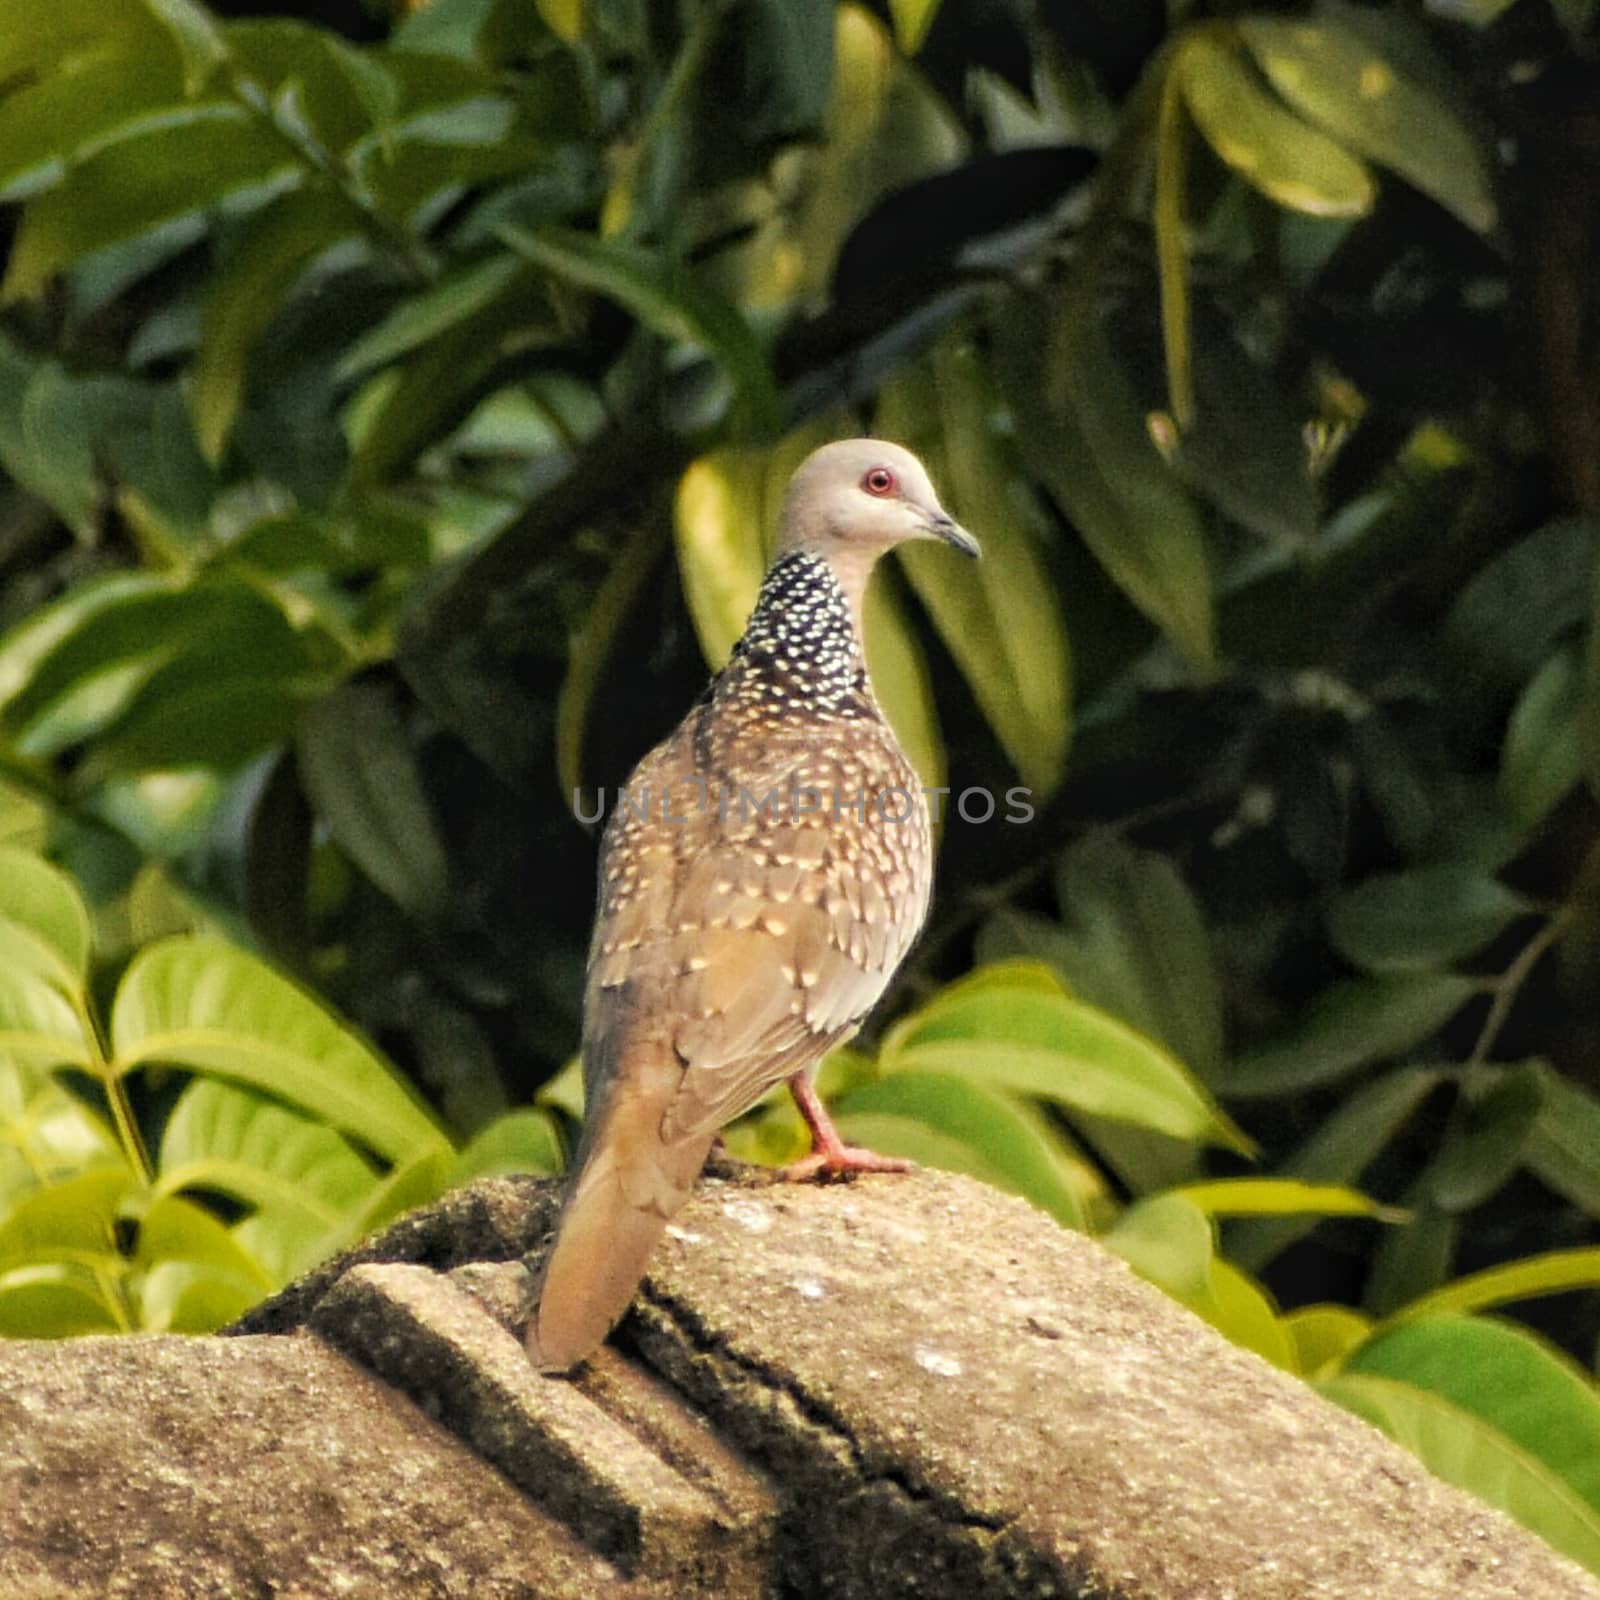 A spotted dove sitting on building roof and looking around. Green tree leaves are seen in background